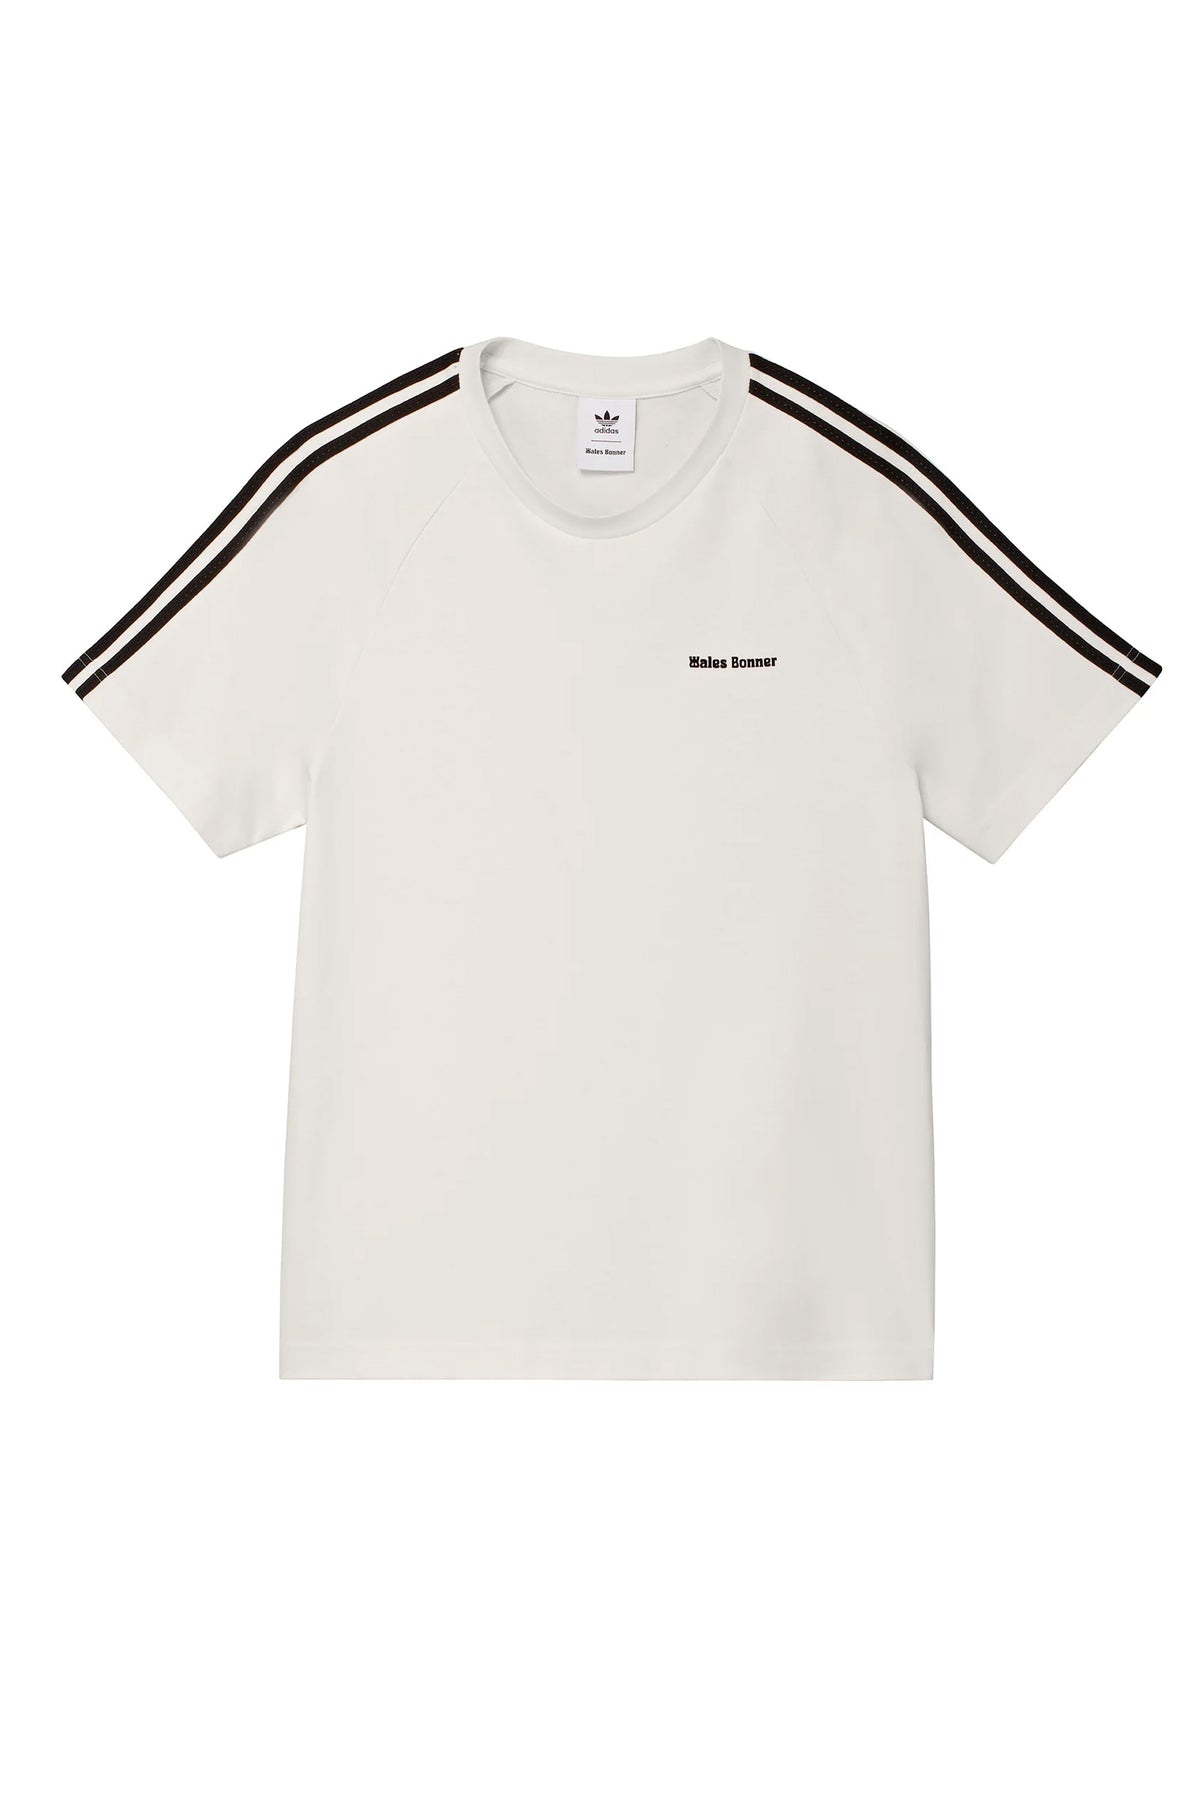 ADIDAS ORIGINALS BY WALES BONNER WB S/S TEE / WHT